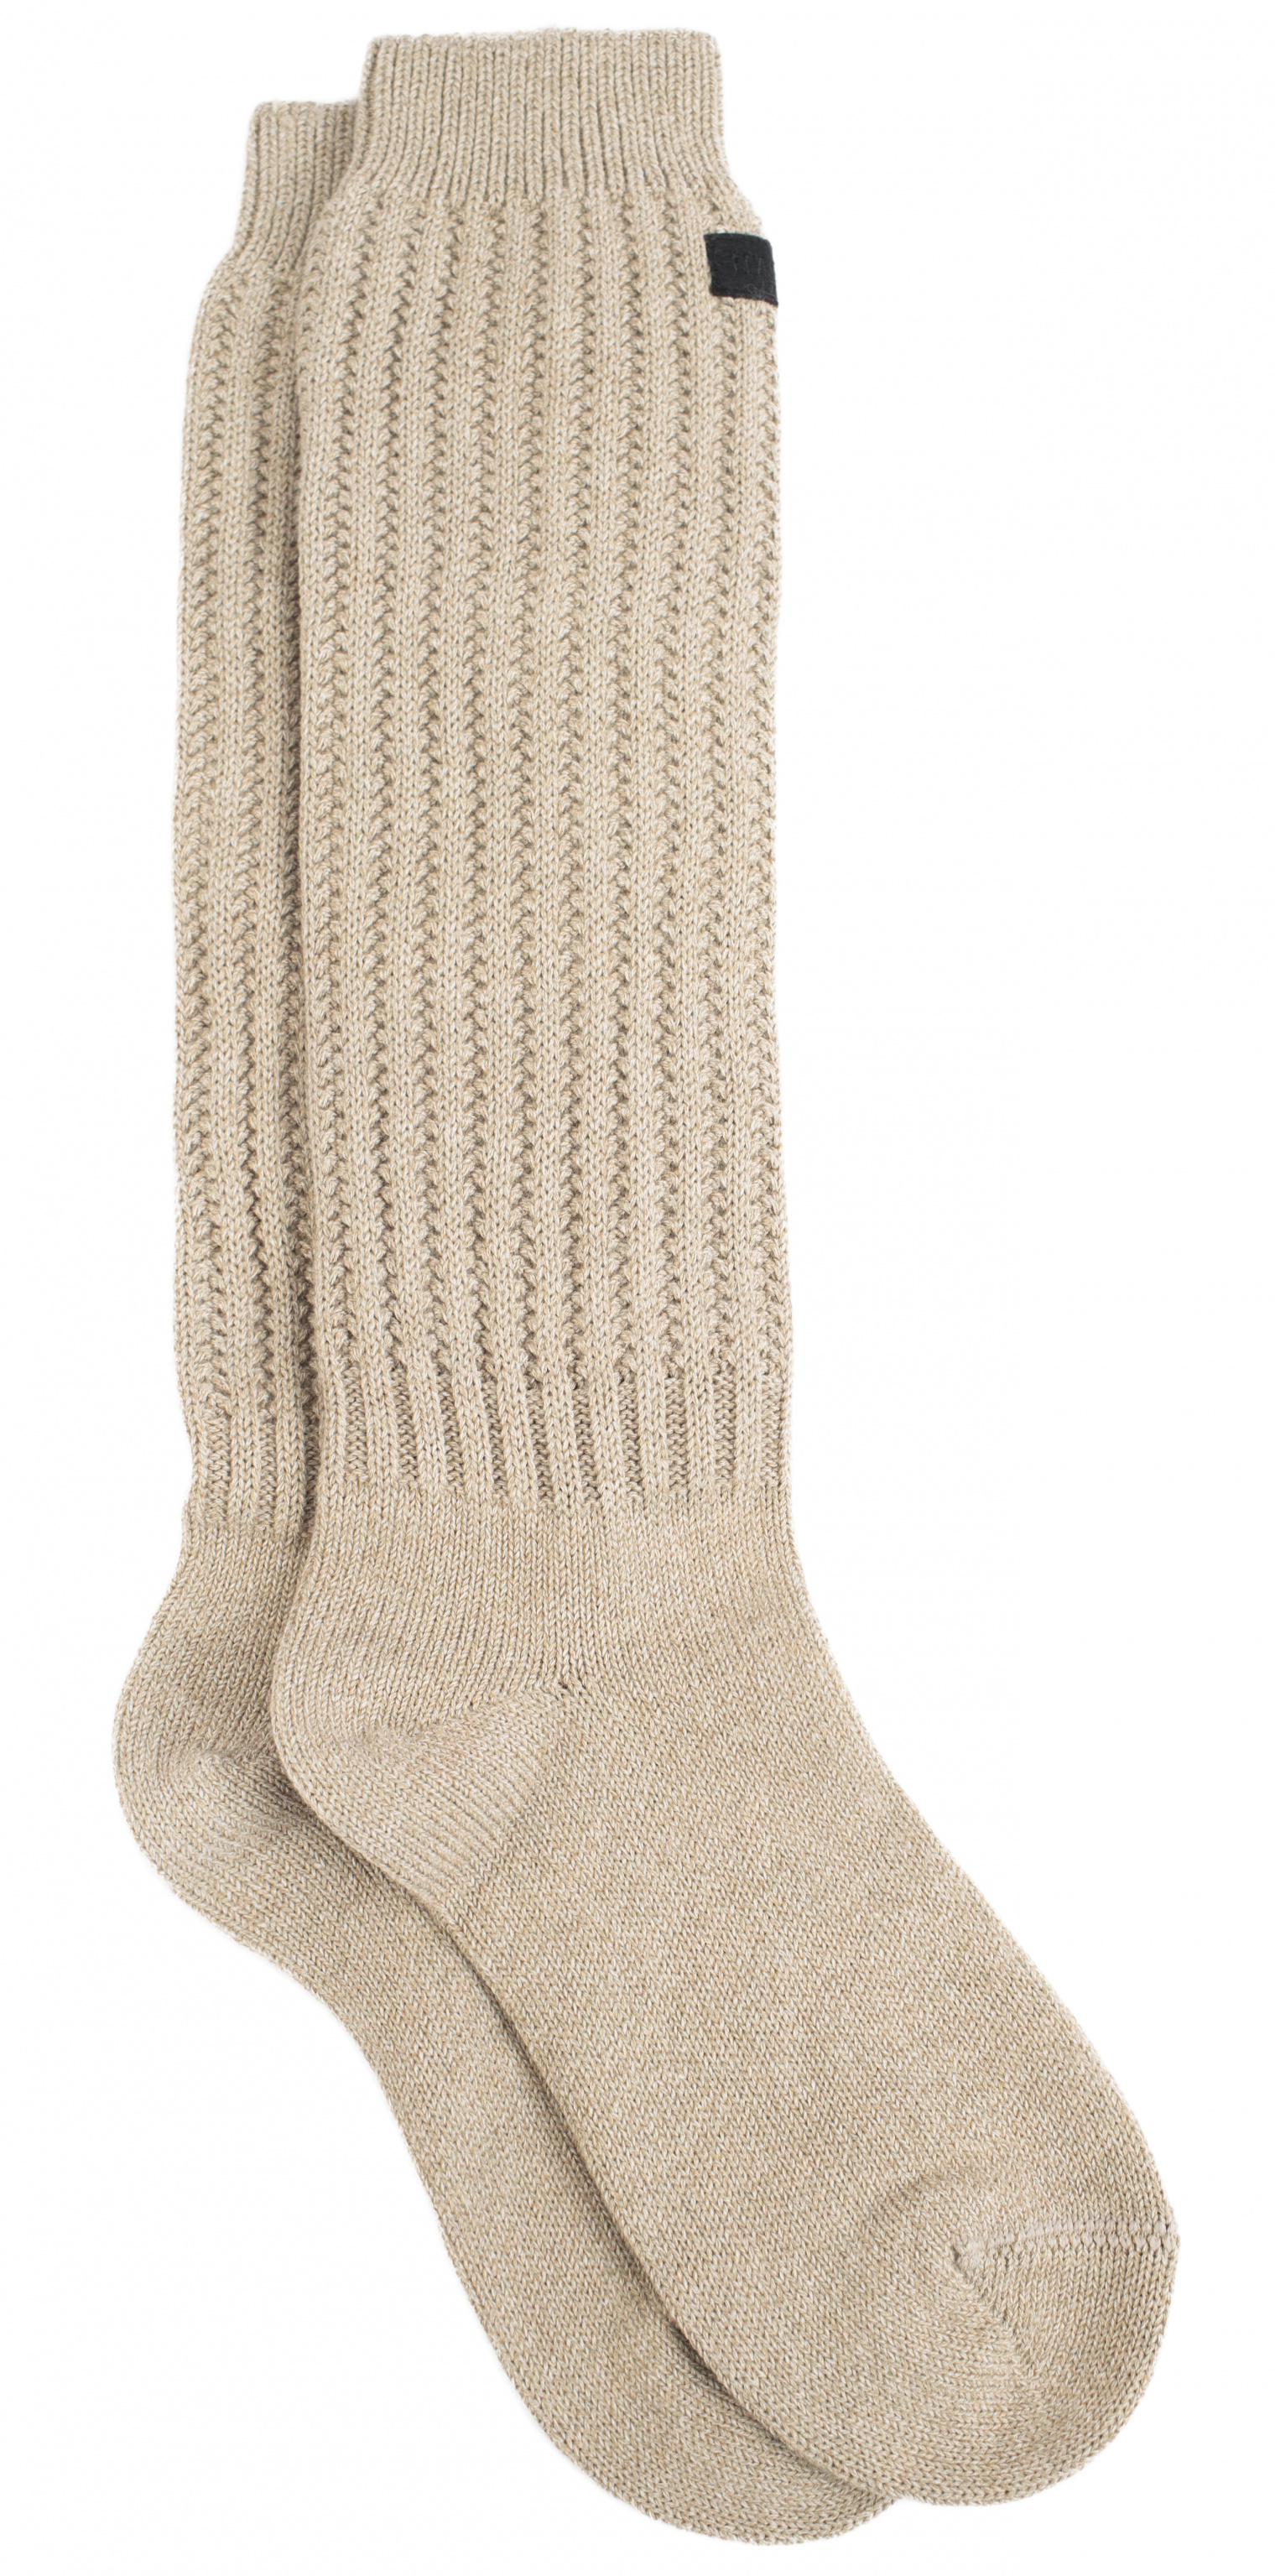 Fear of God 7th Collection Socks in beige